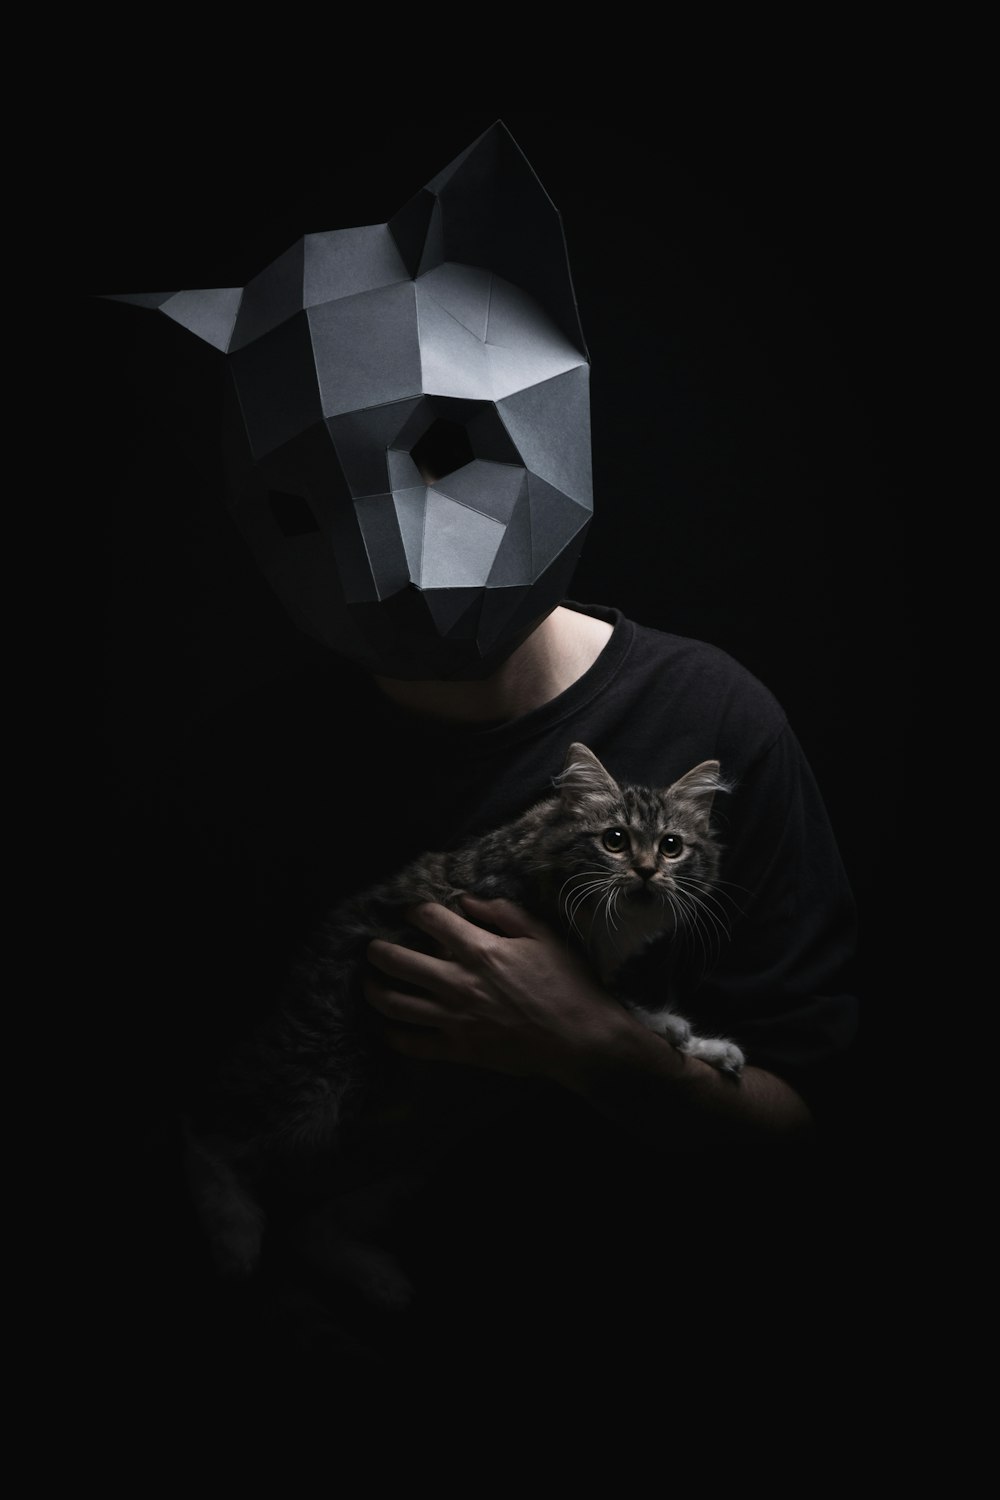 man with mask holding cat